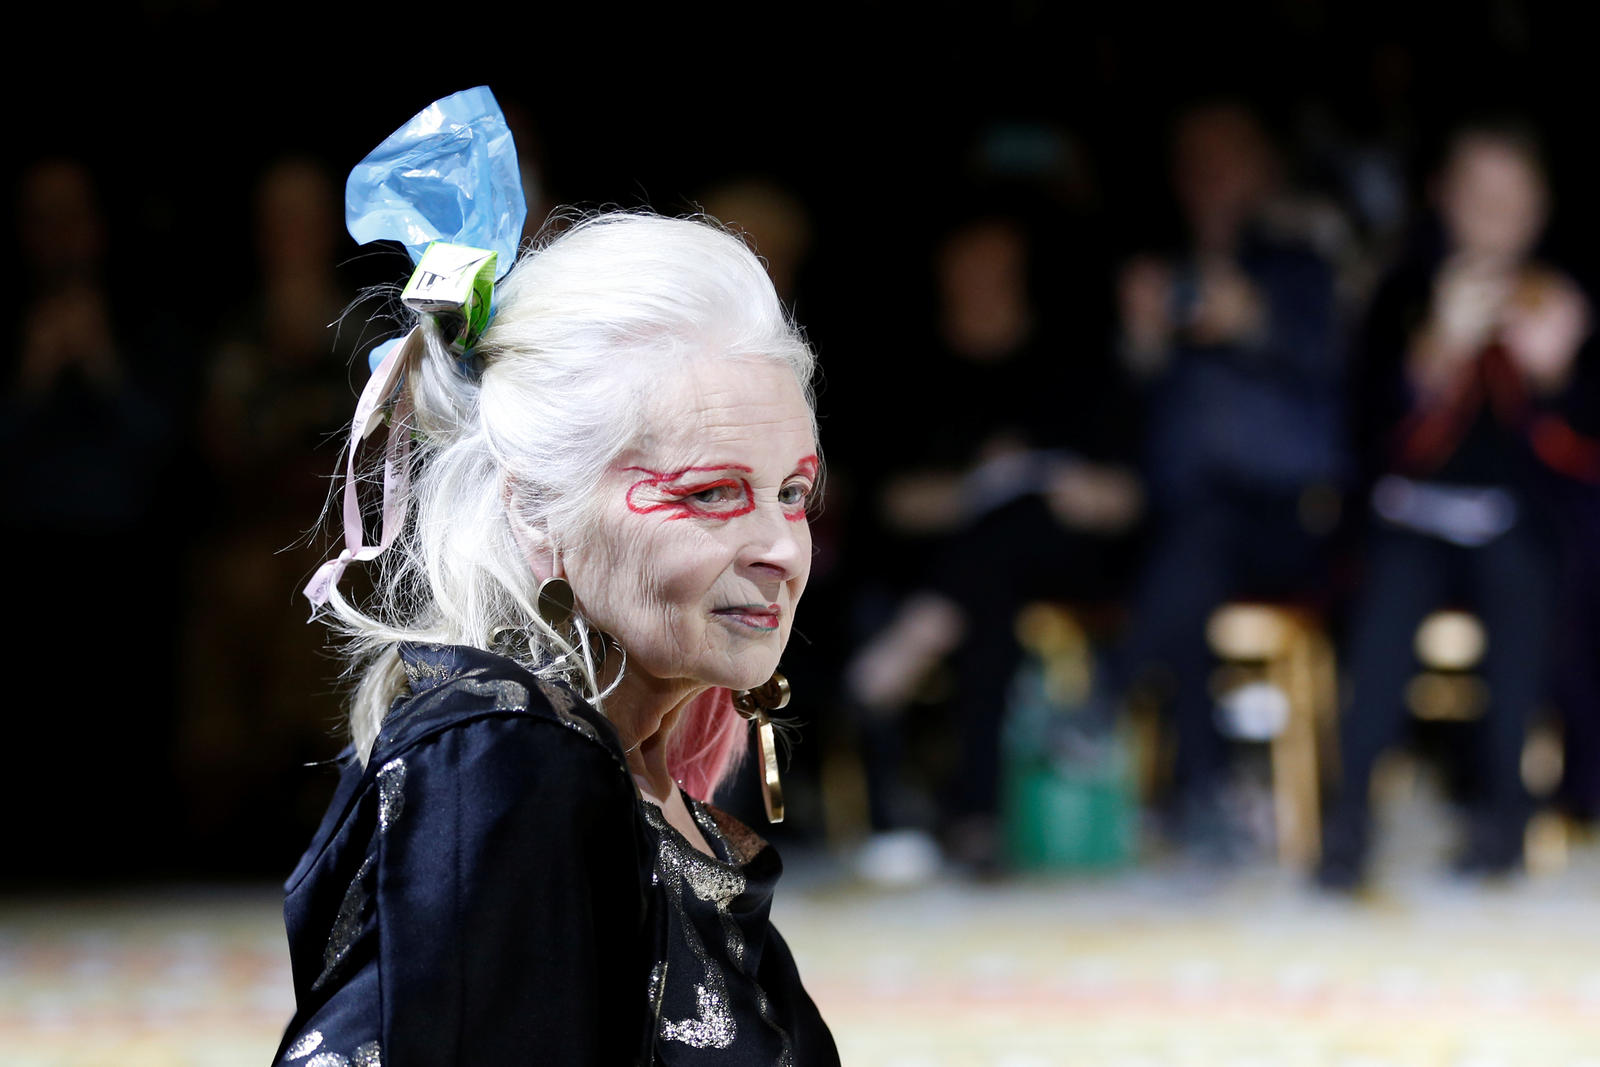 Designer Vivienne Westwood presents a creation by her husband Andreas Kronthaler as part of his Fall/Winter 2017-2018 women’s ready-to-wear collection show for Vivienne Westwood during Fashion Week in Paris